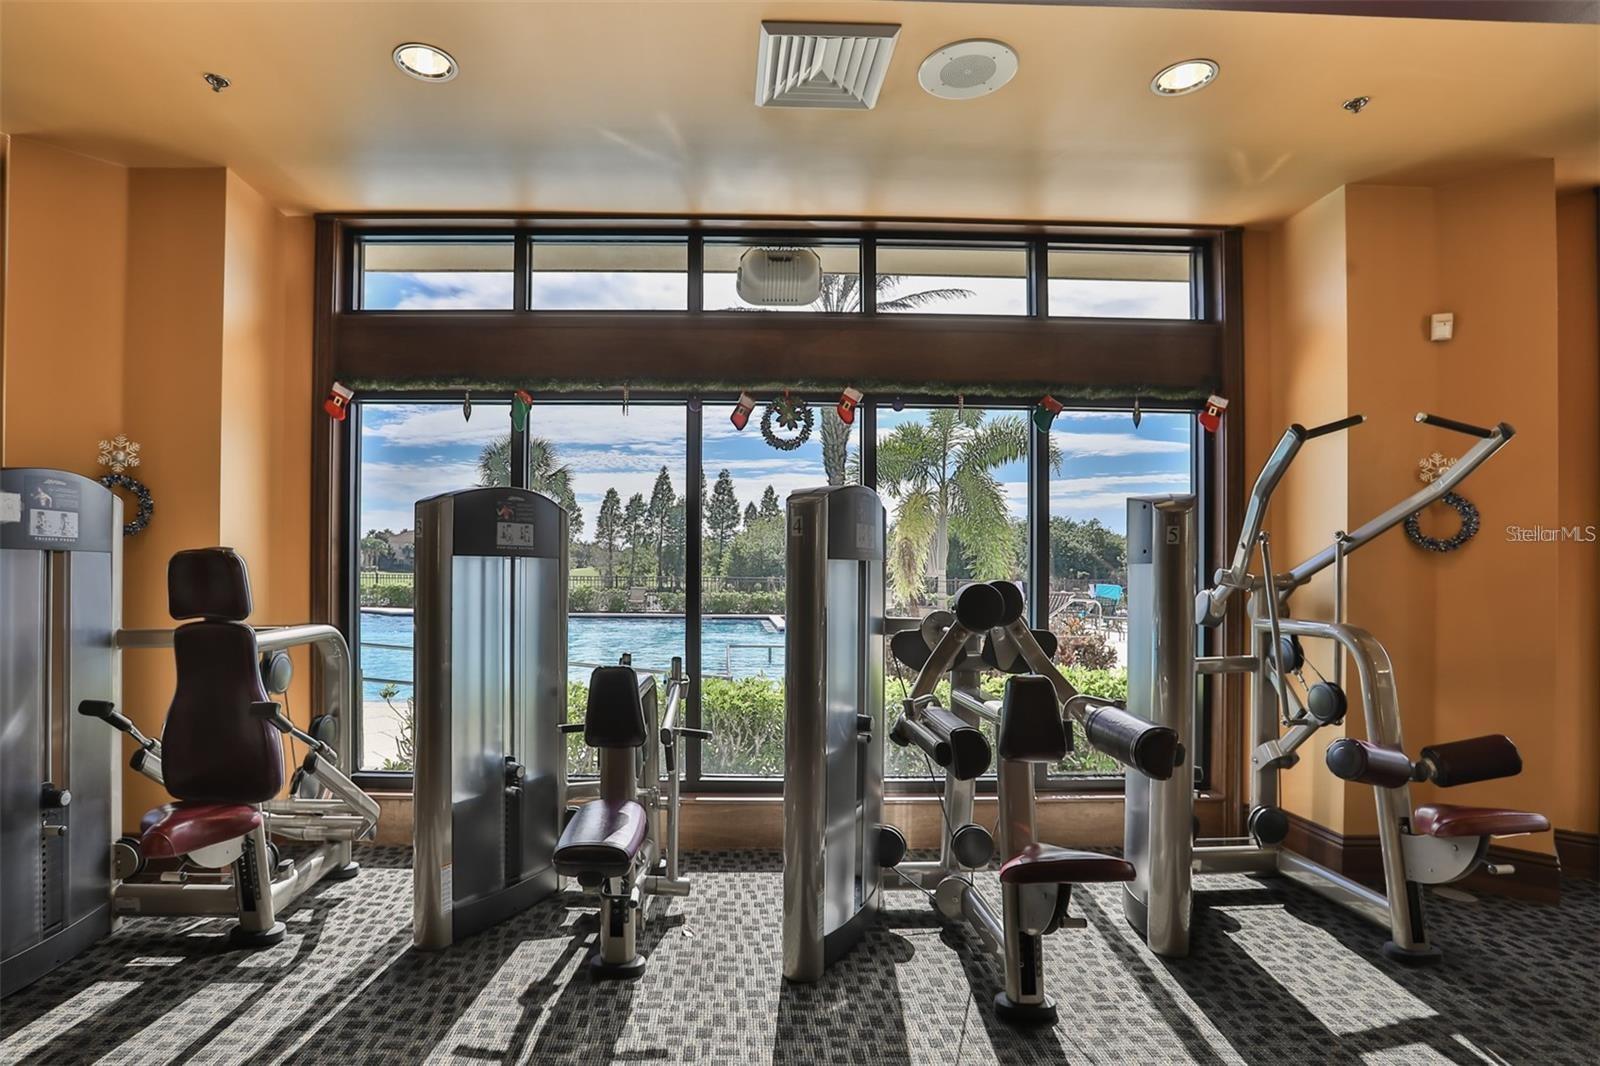 What a great place to workout at Club Renaissance